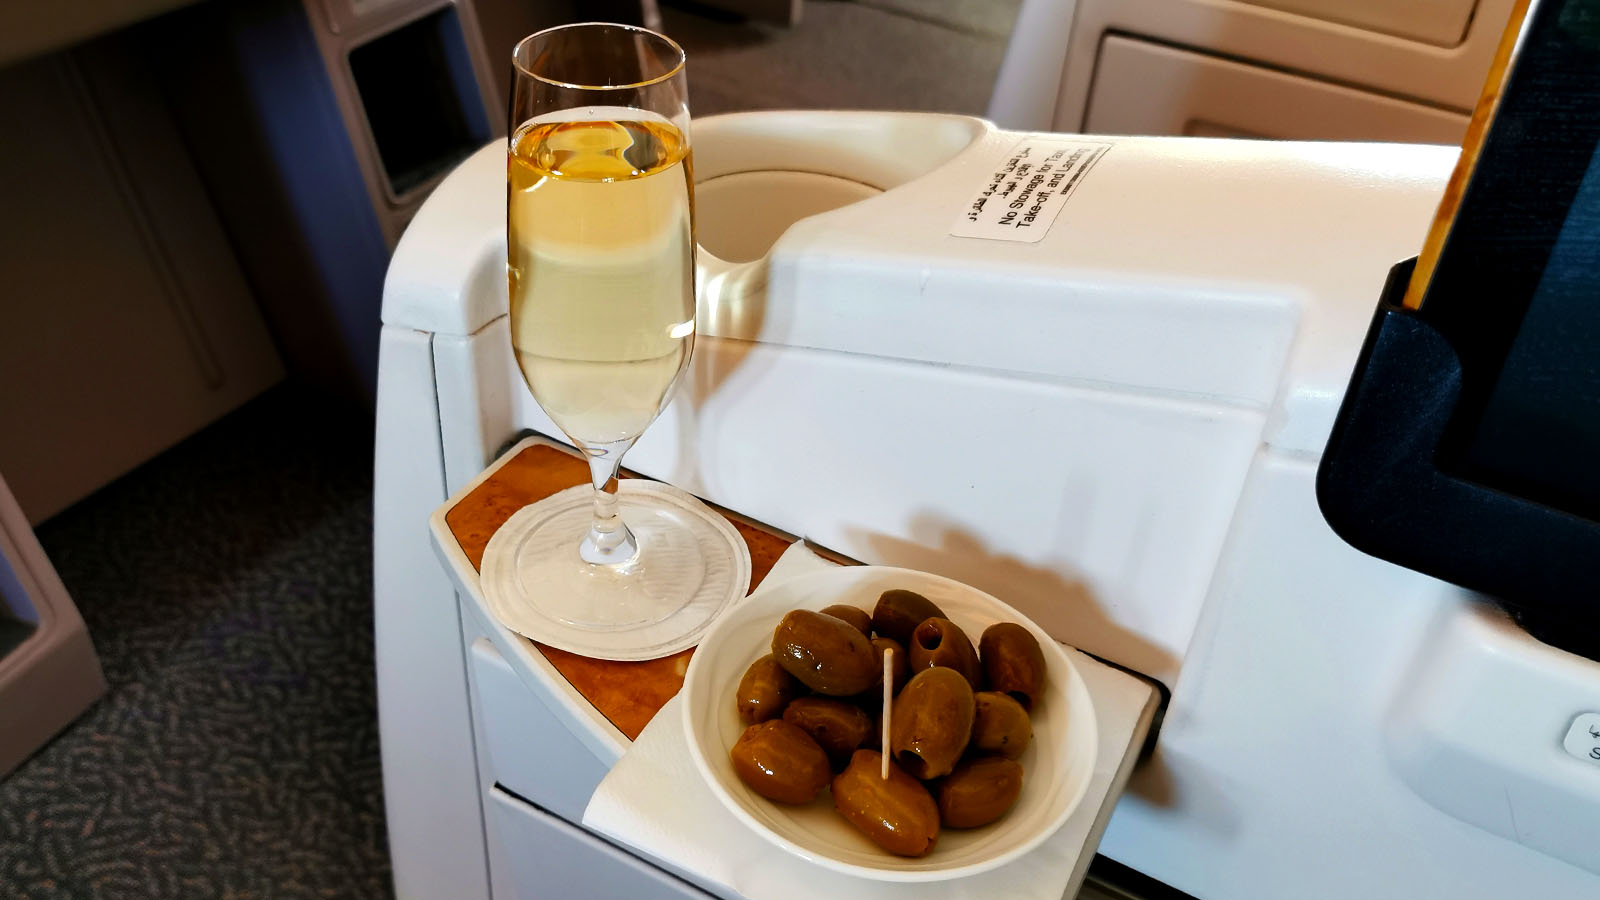 Veuve Clicquot and olives in Emirates Boeing 777 Business Class